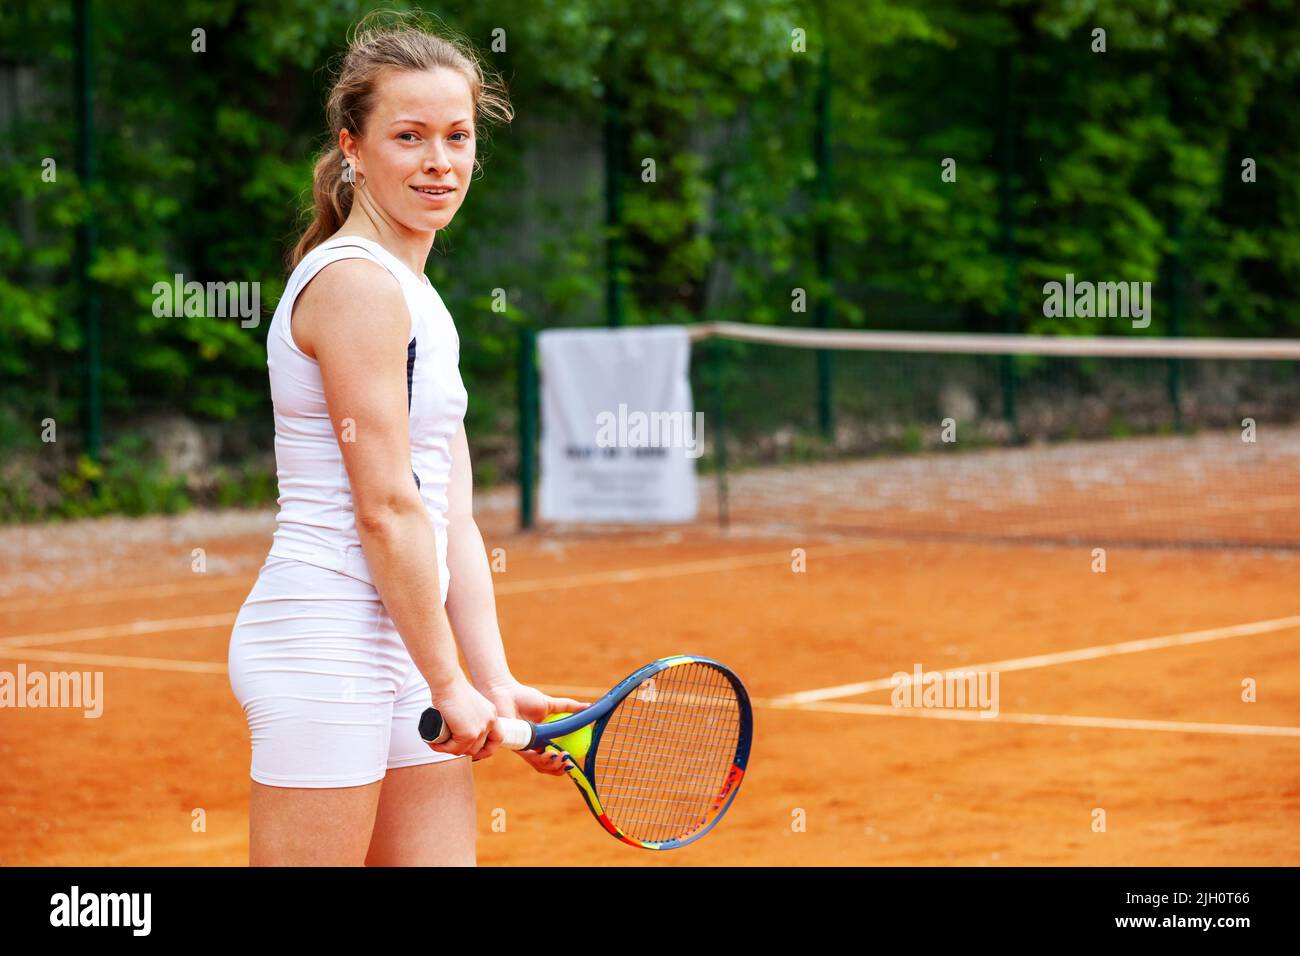 Happy female tennis player holding the racket in ready position. Stock Photo